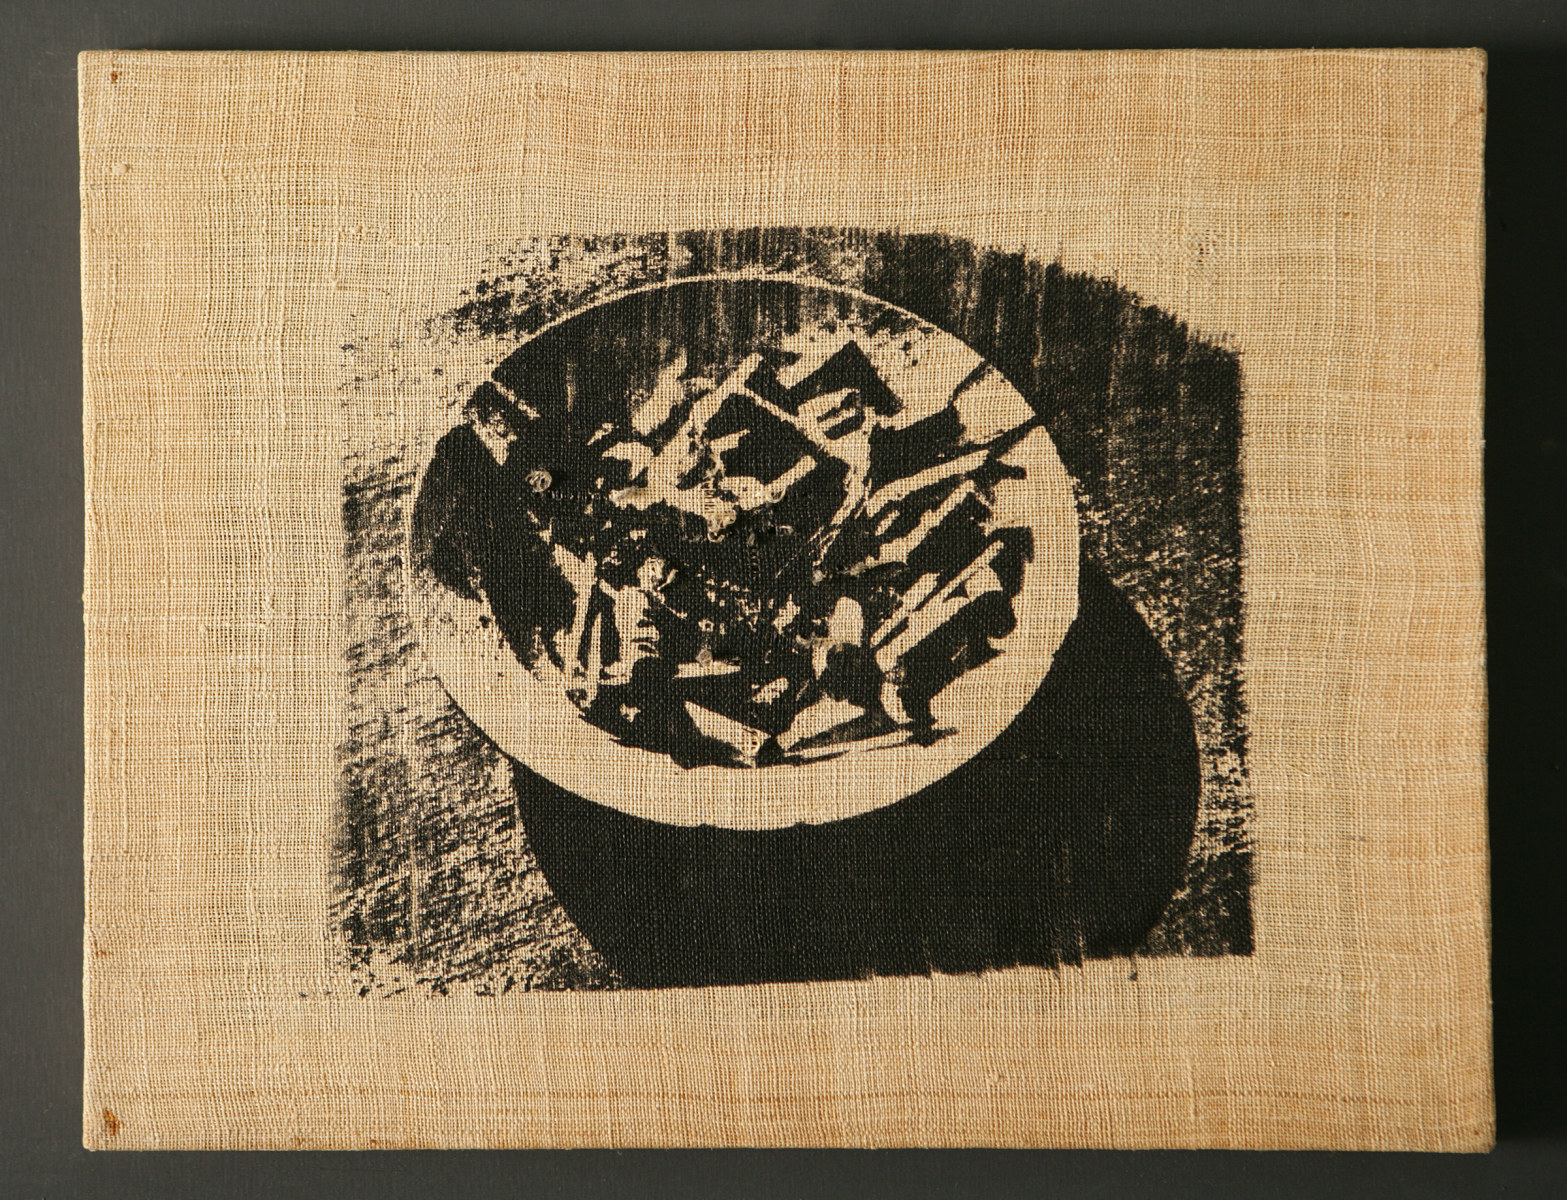 Untitled-76008, 1976, Serigraphy on Canvas, 31.8x41cm